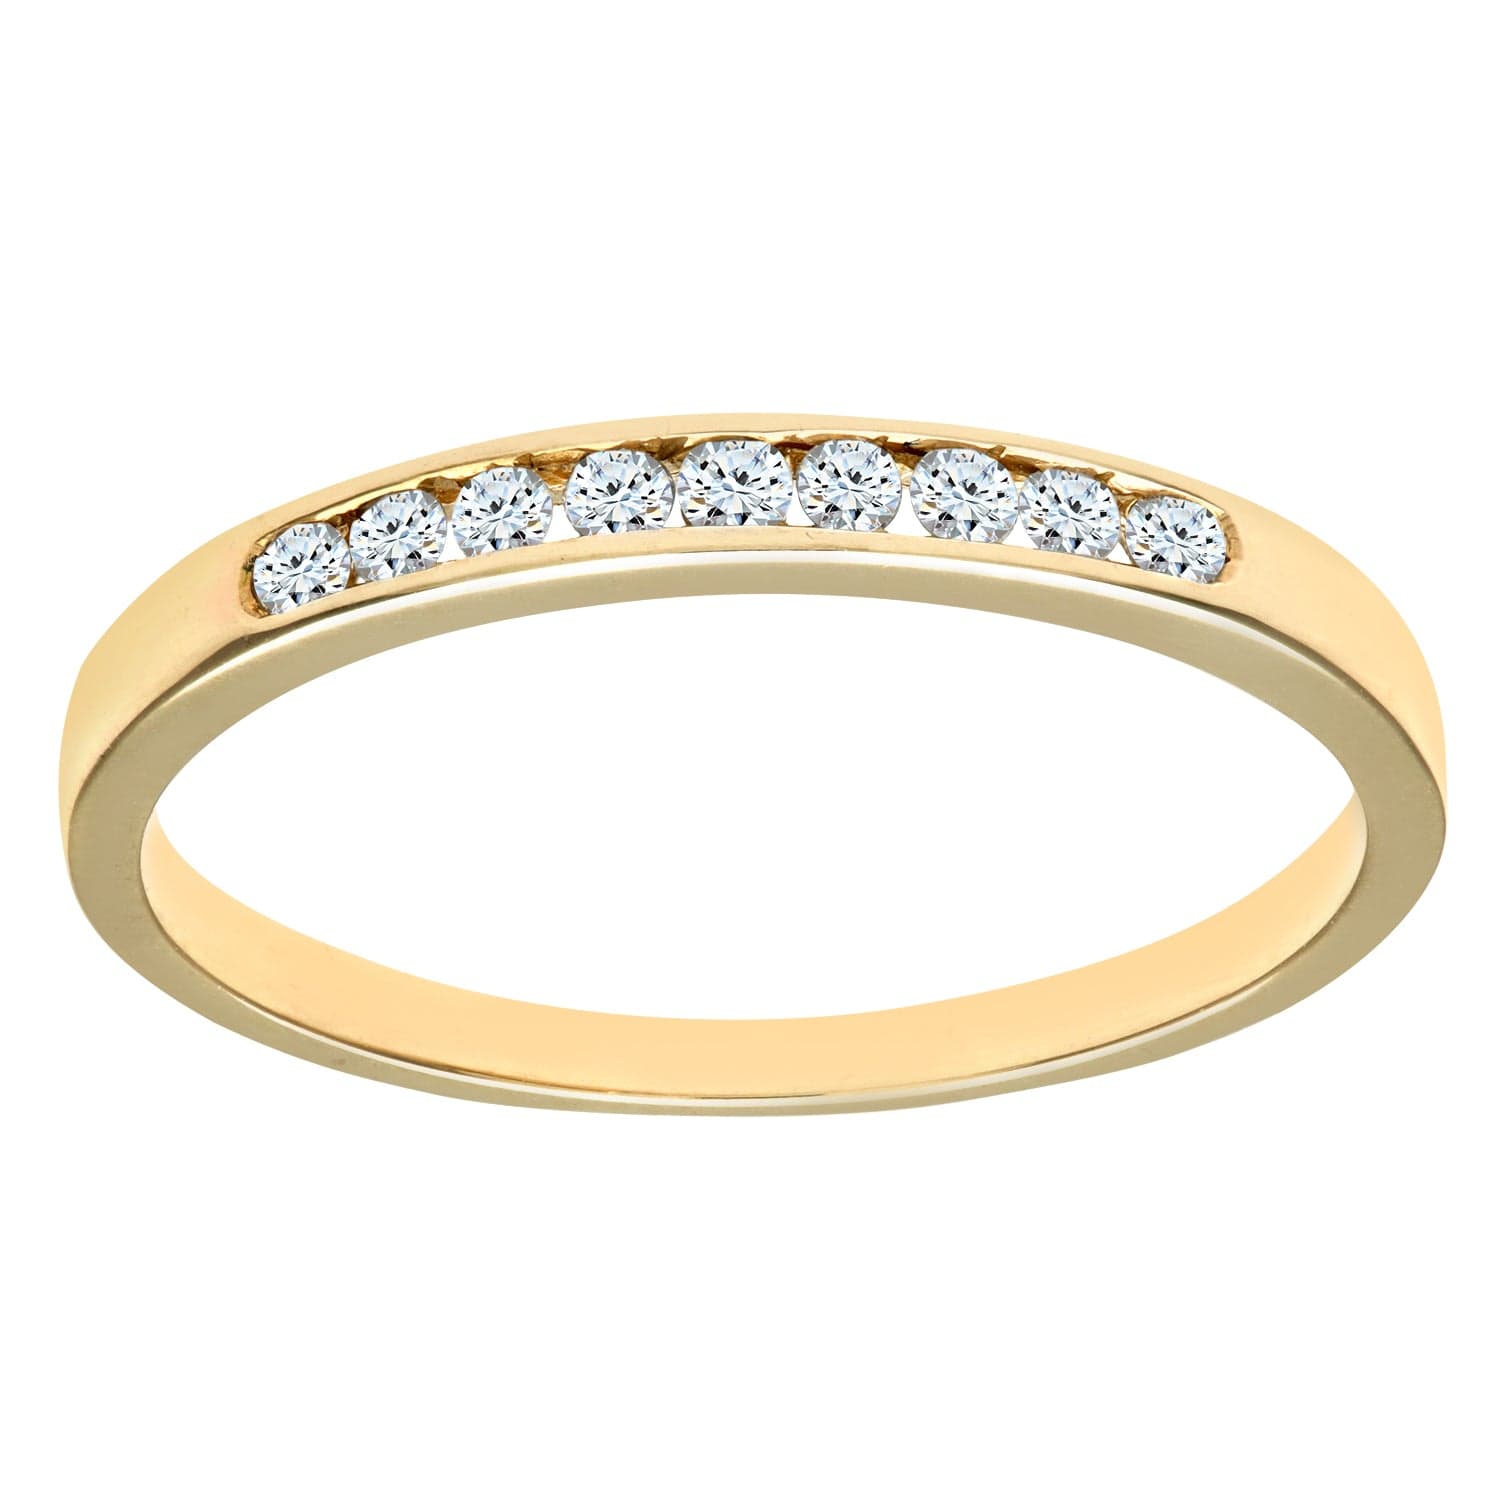 Lynora Luxe Ring White Gold 9ct / Diamond 9ct Yellow Gold Channel Set Diamond Eternity Ring